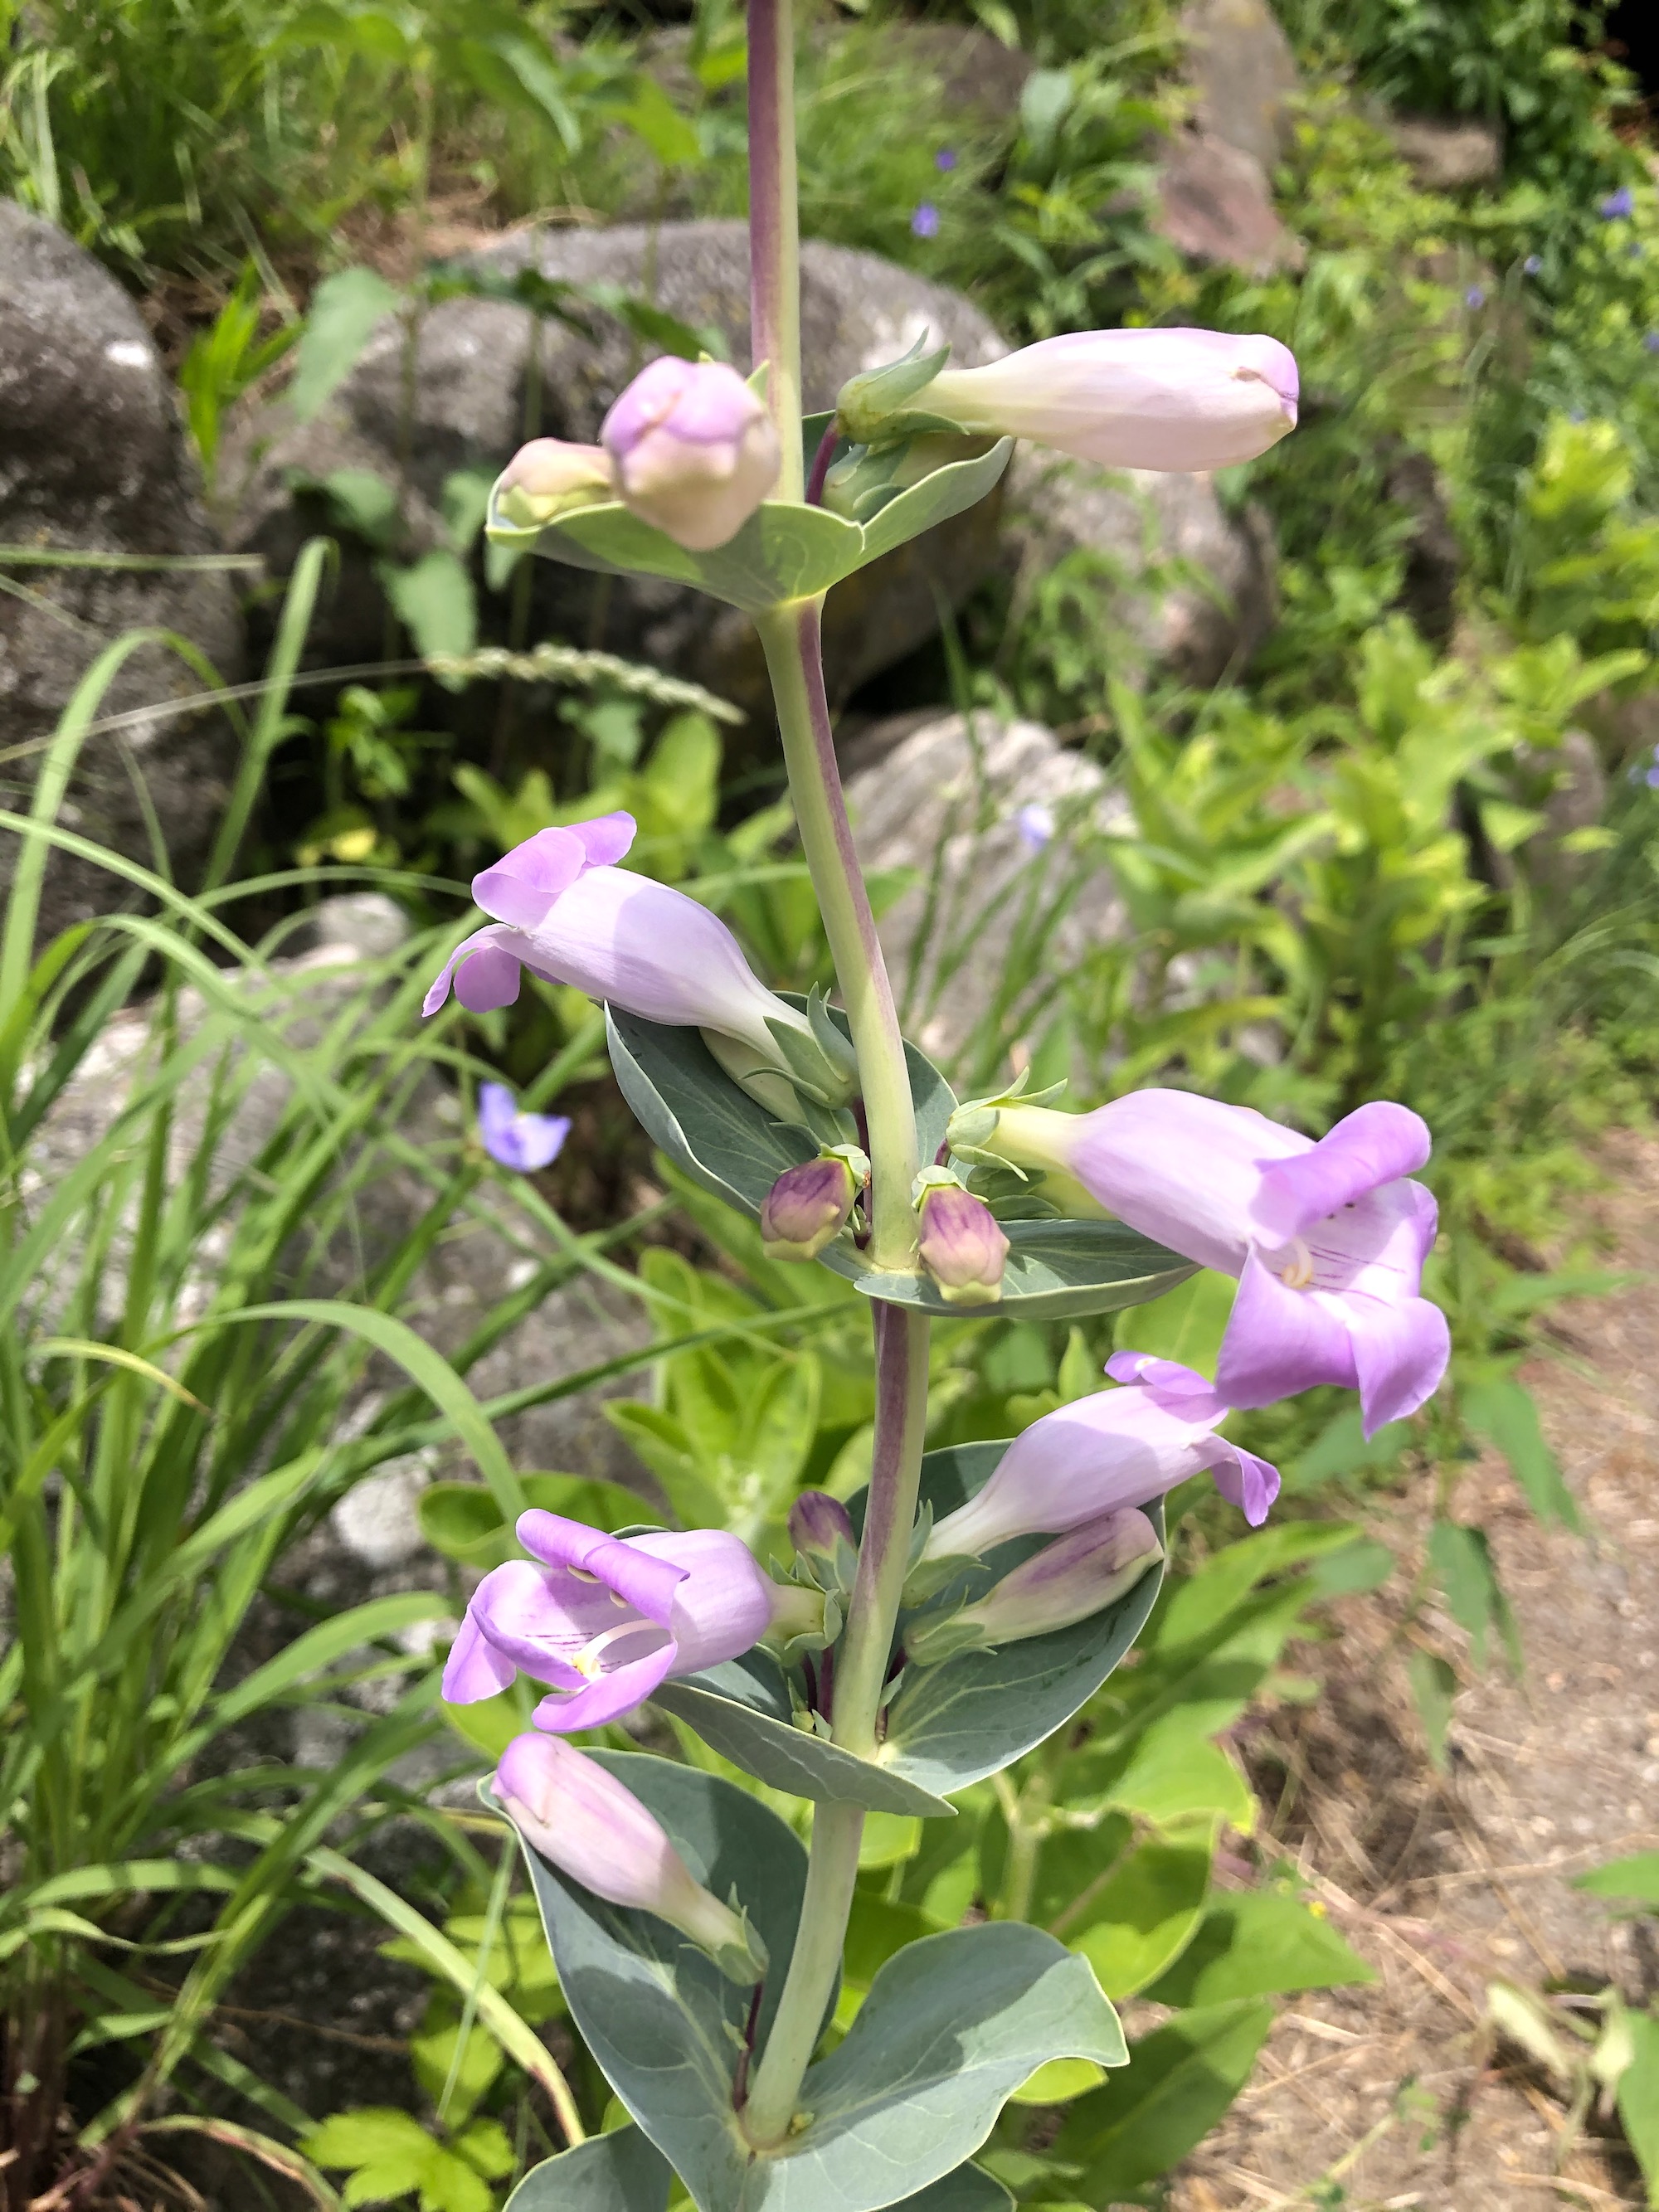 Large Beardtongue in the UW-Madison Arboretum in Madison, Wisconsin on May 31, 2021.